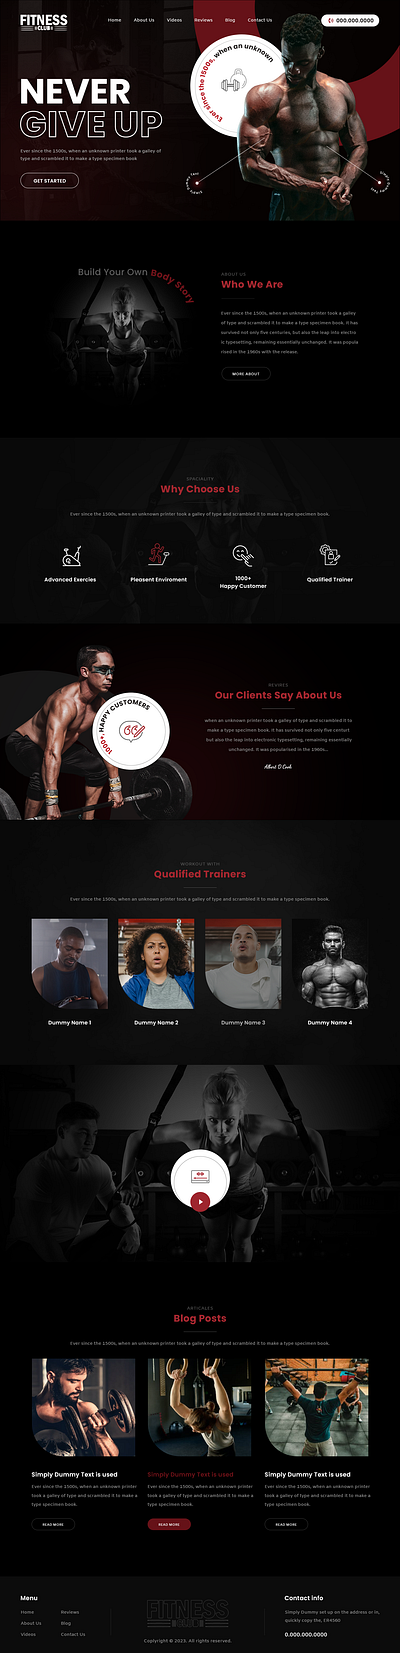 Gym/Fitness Website fitness fitnessmotivation gym gymfitness website healthylifestyle muscle personaltrainer powerlifting ui workout